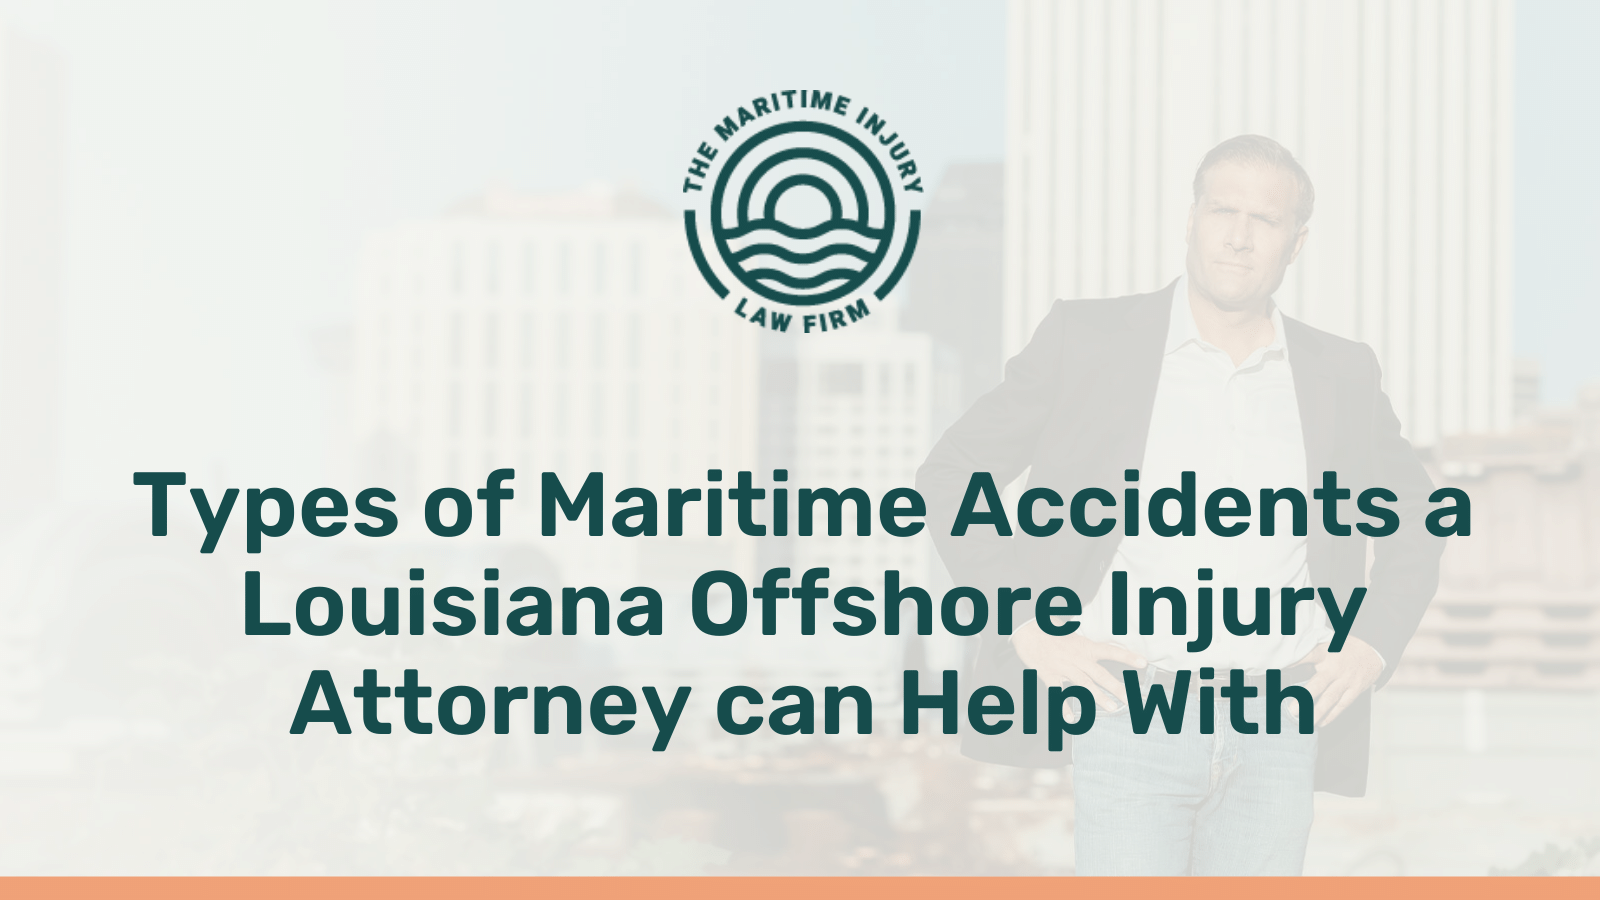 Types of Maritime Accidents a Louisiana Offshore Injury Attorney can Help With - maritime injury law firm - George Vourvoulias